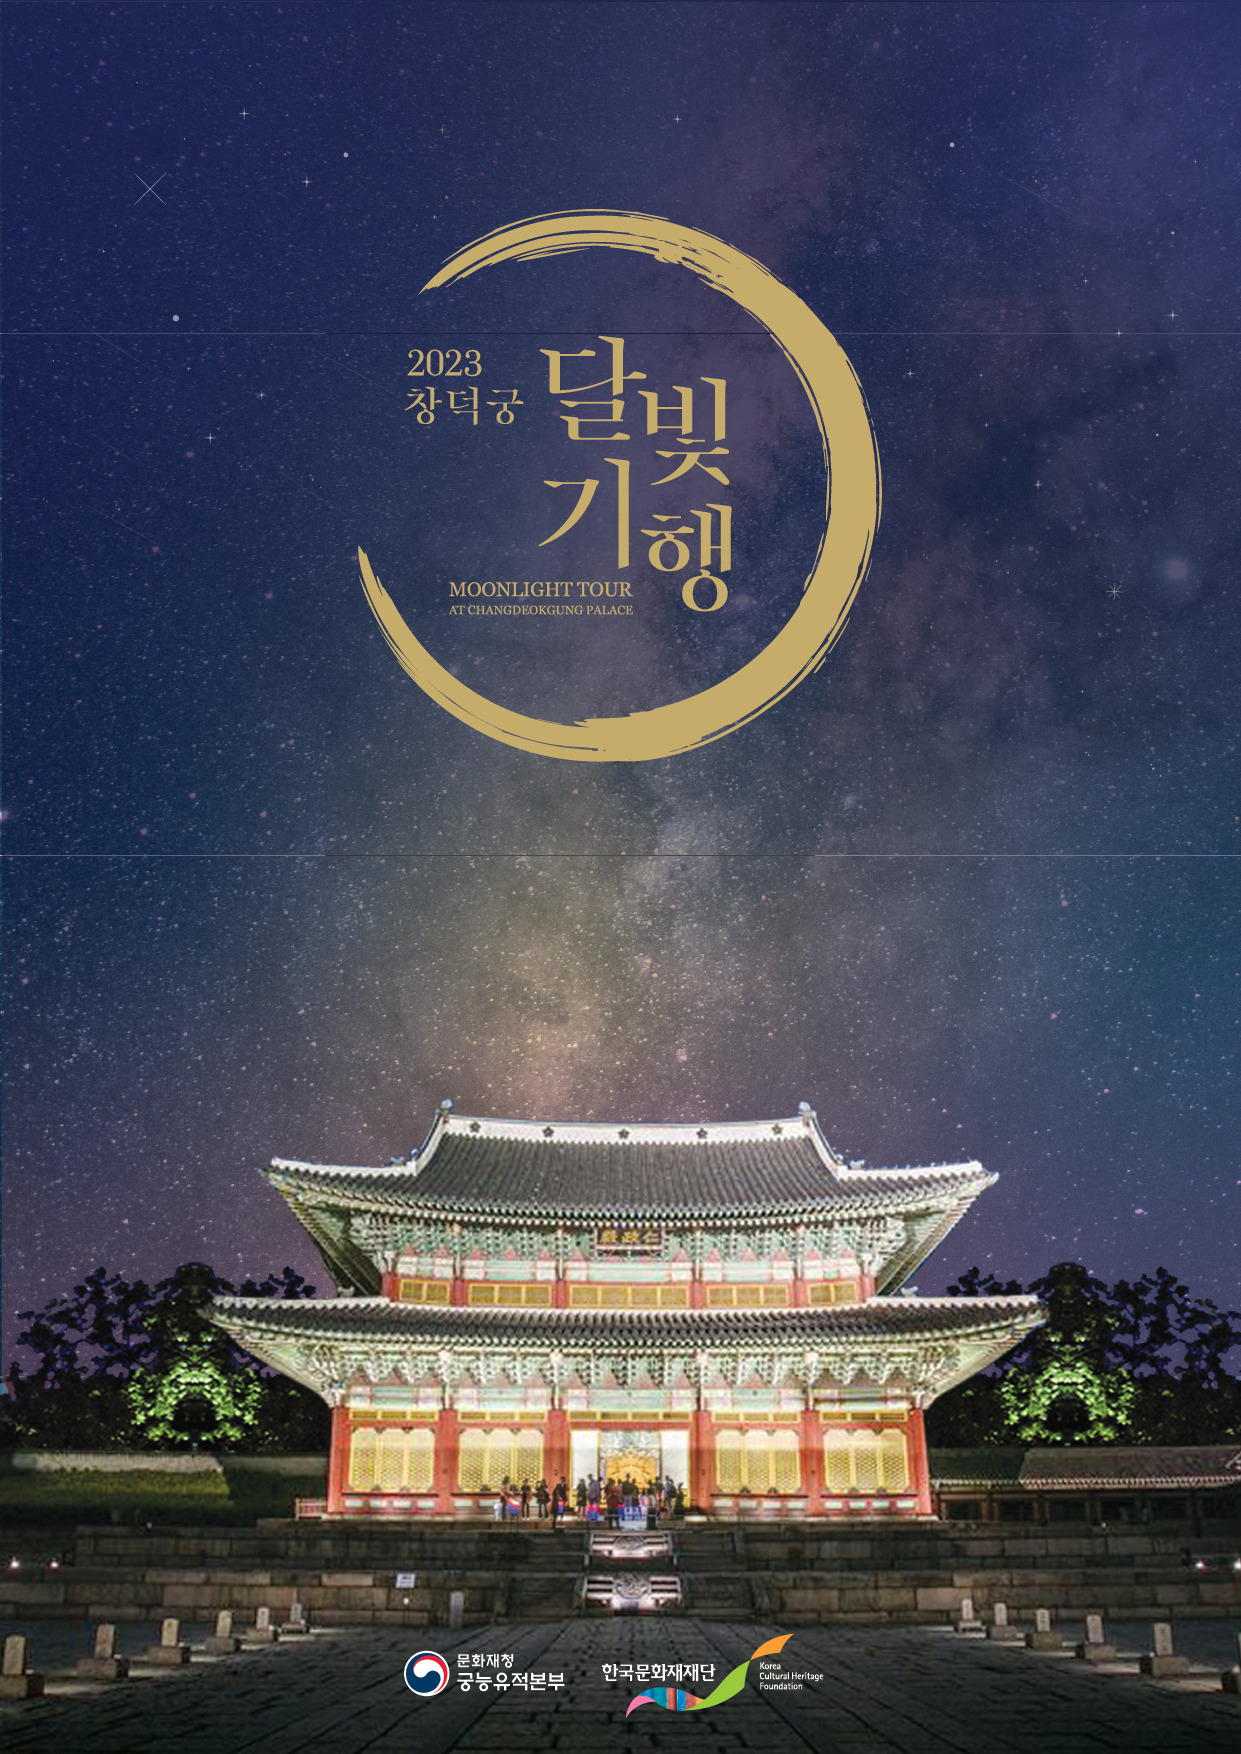 Poster for “Moonlight Tour” at Changdeokgung Palace (CHA)